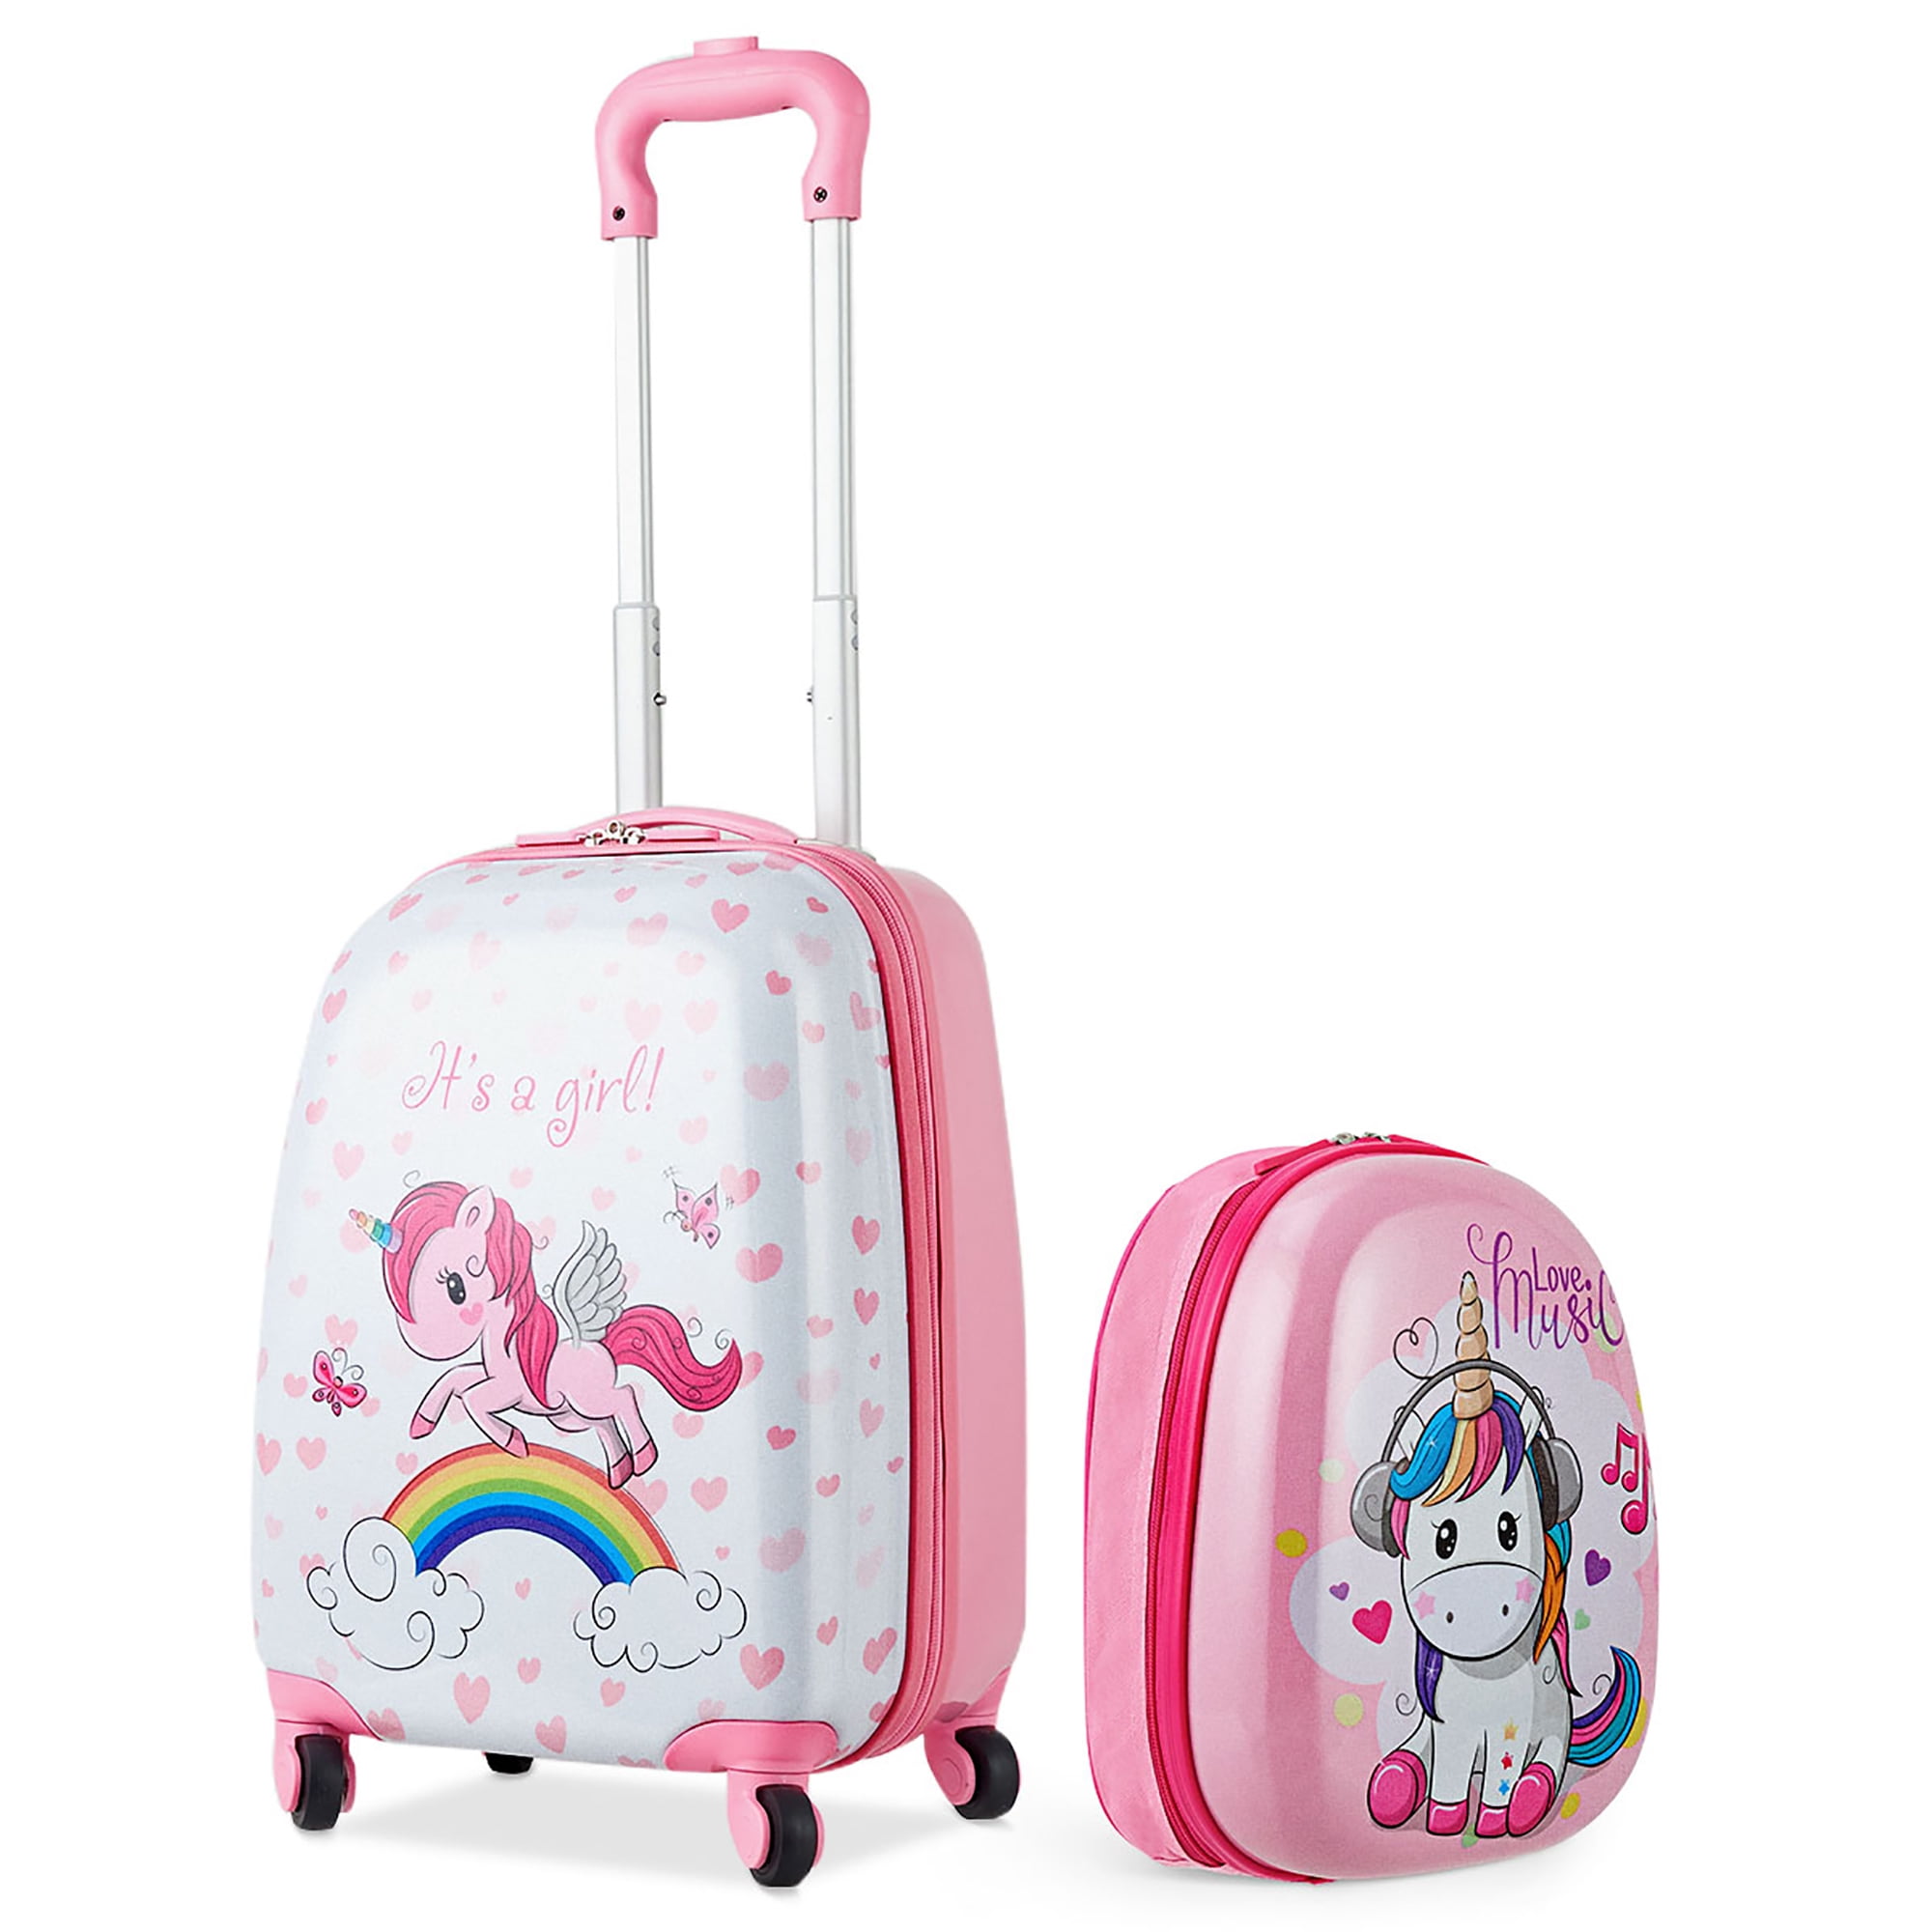 RALME 5 Pc. Girls’ Rolling Suitcase Set with Backpack, Neck Pillow, Water Bottle, and Luggage Tag